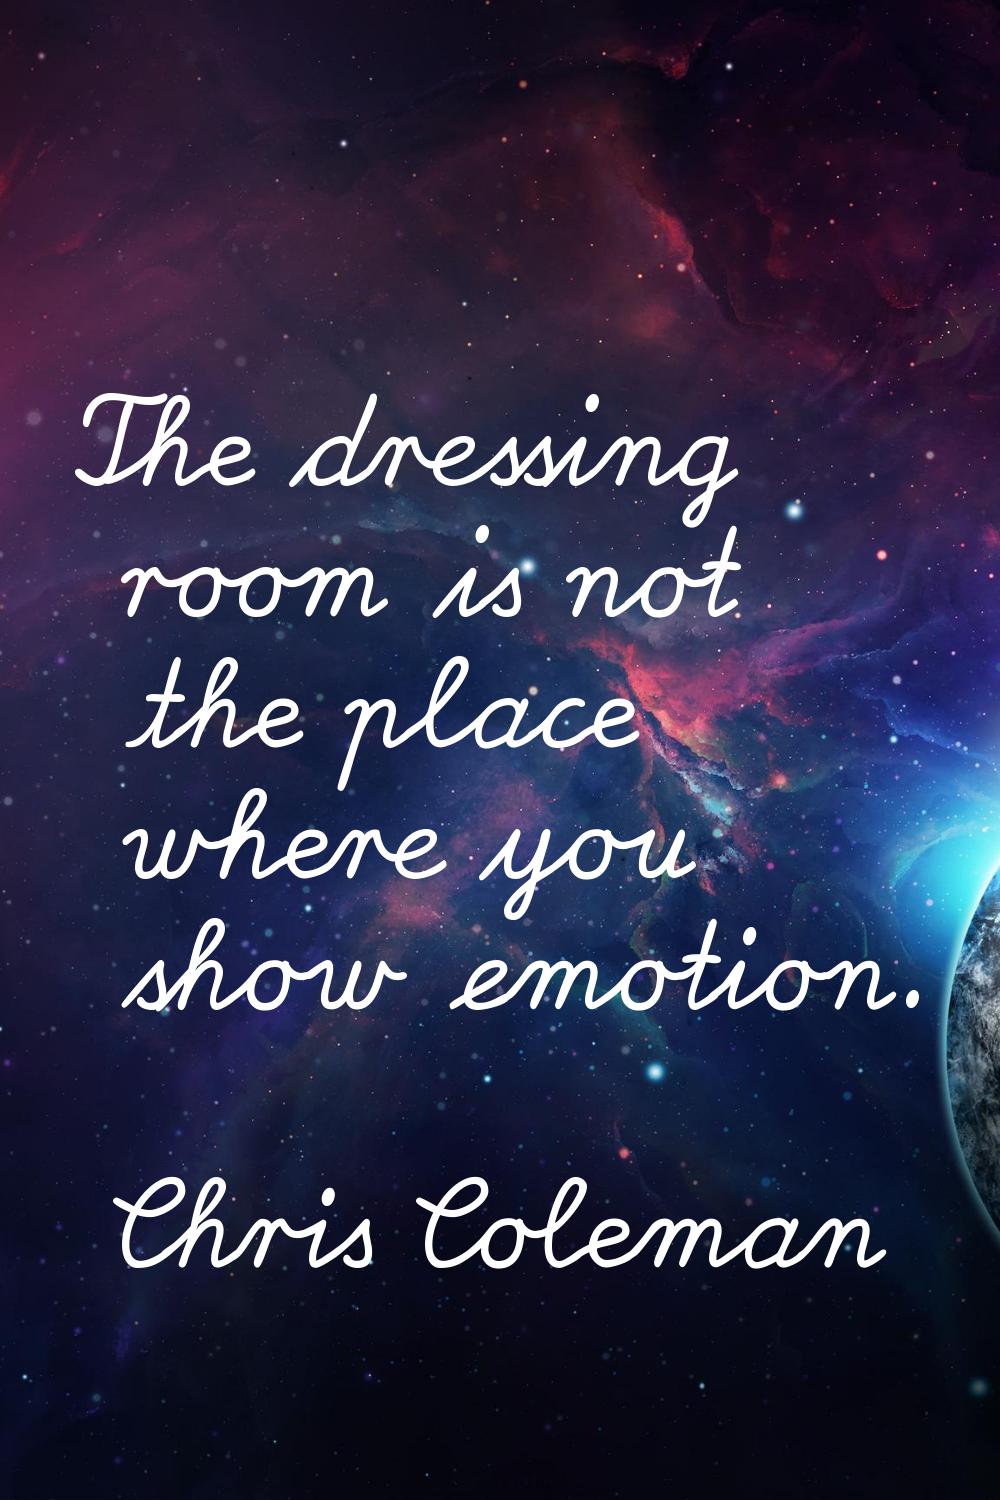 The dressing room is not the place where you show emotion.